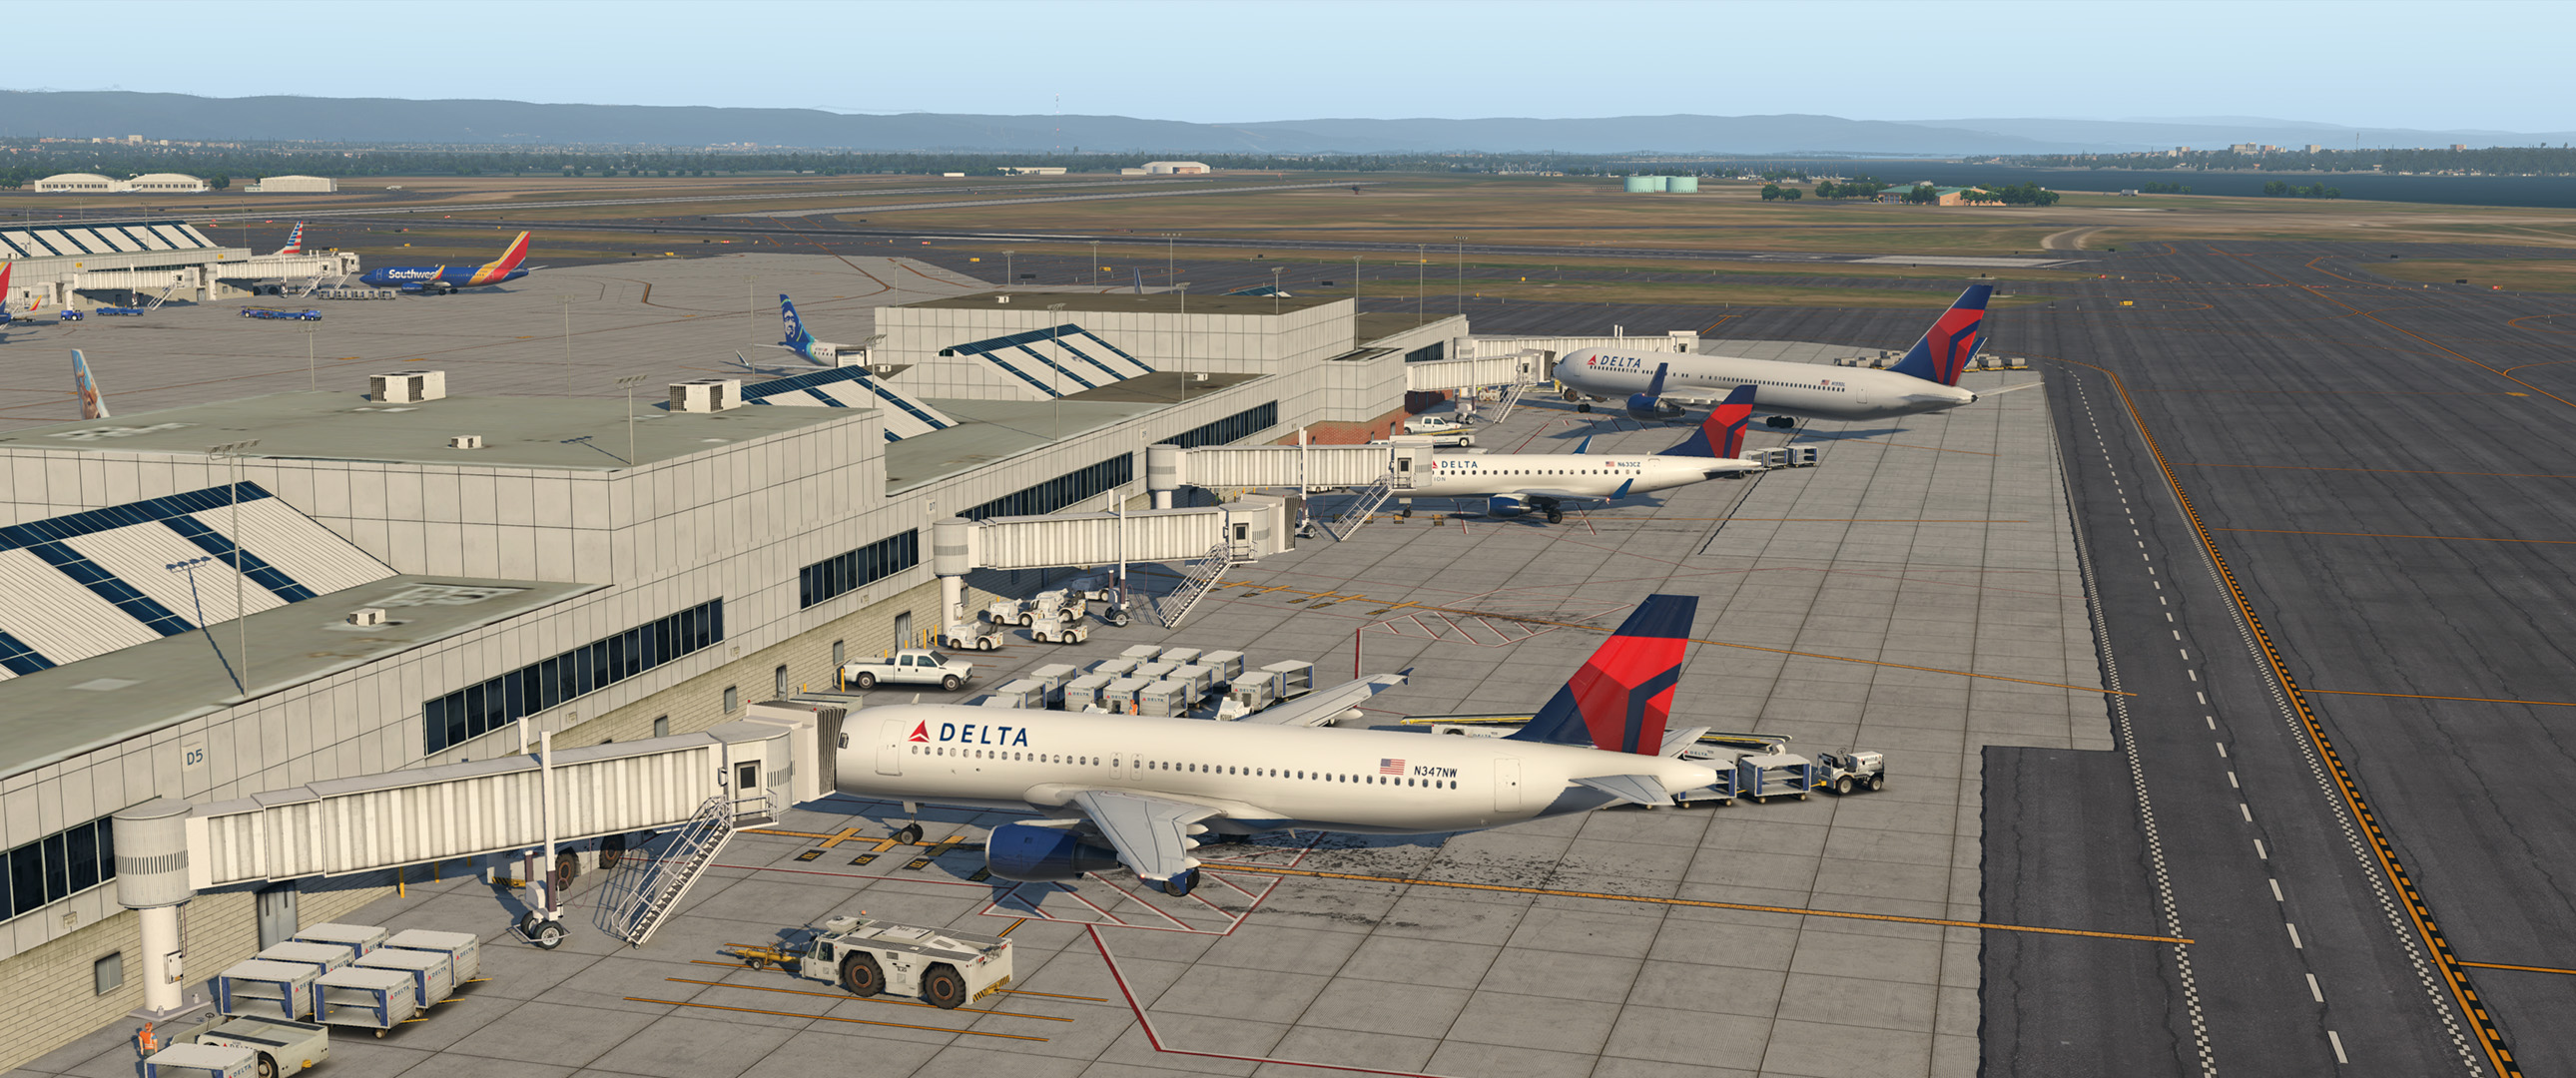 Best Freeware Sceneries for X-Plane 11 image 95